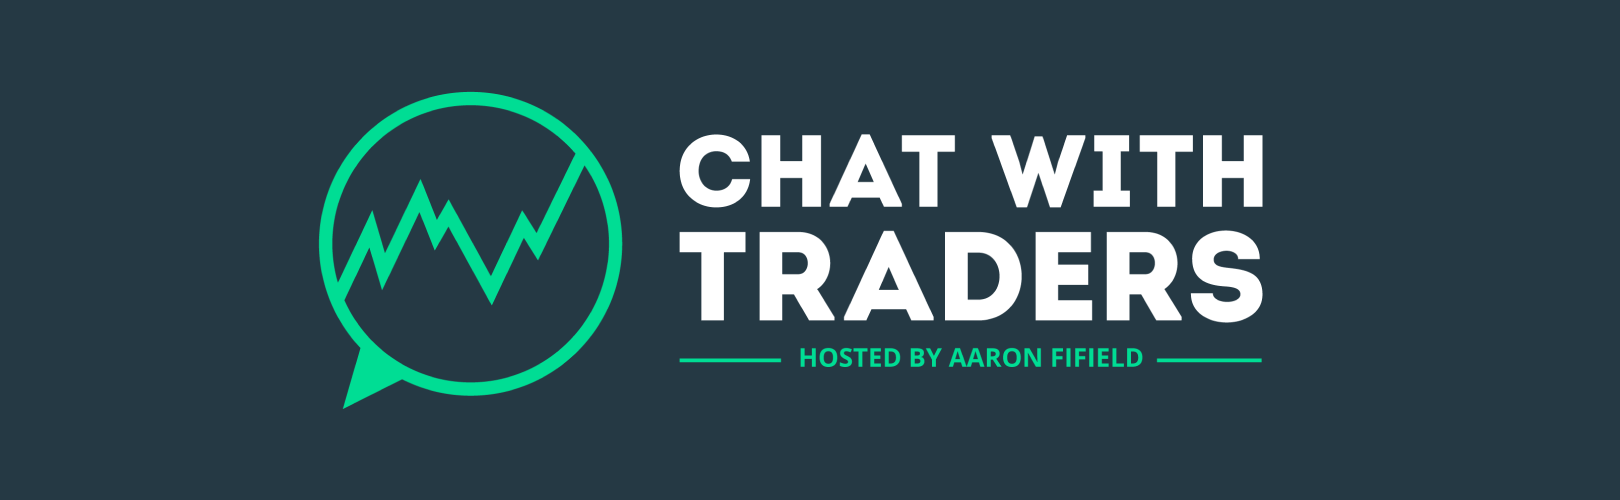 chat with traders